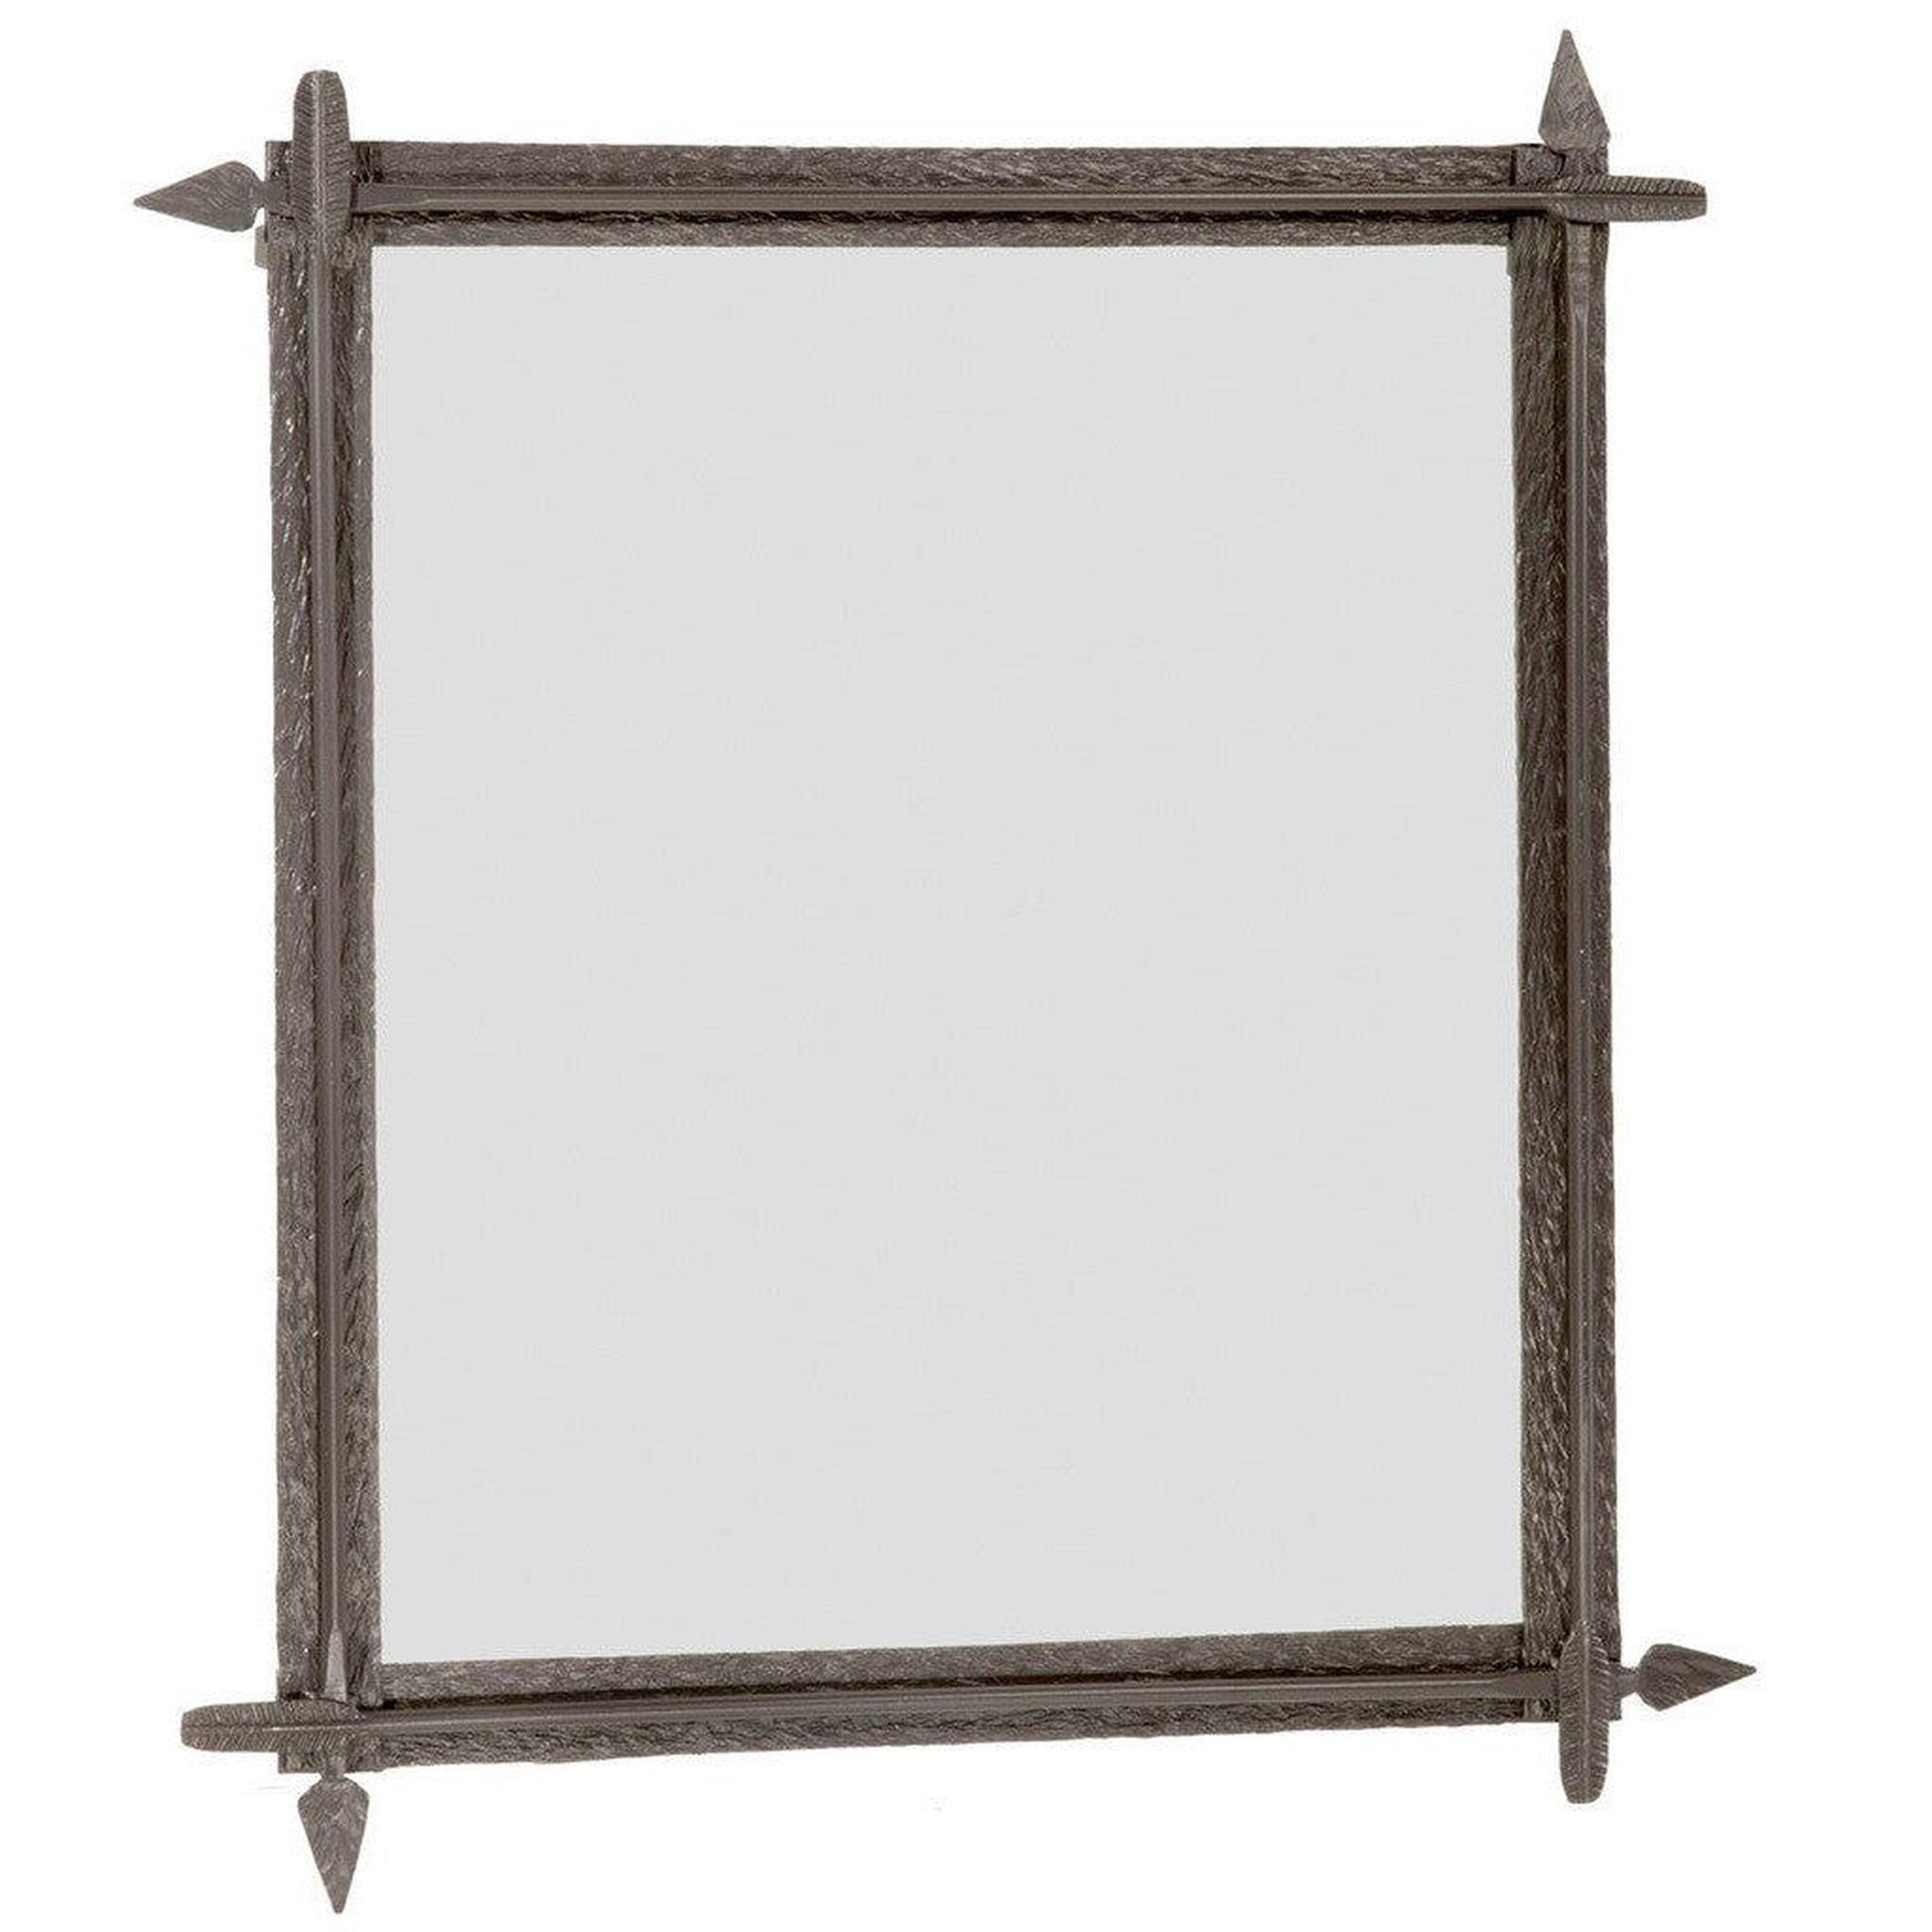 Stone County Ironworks Quapaw 31" x 43" Large Hand Rubbed Brass Iron Wall Mirror With Pewter Iron Accent